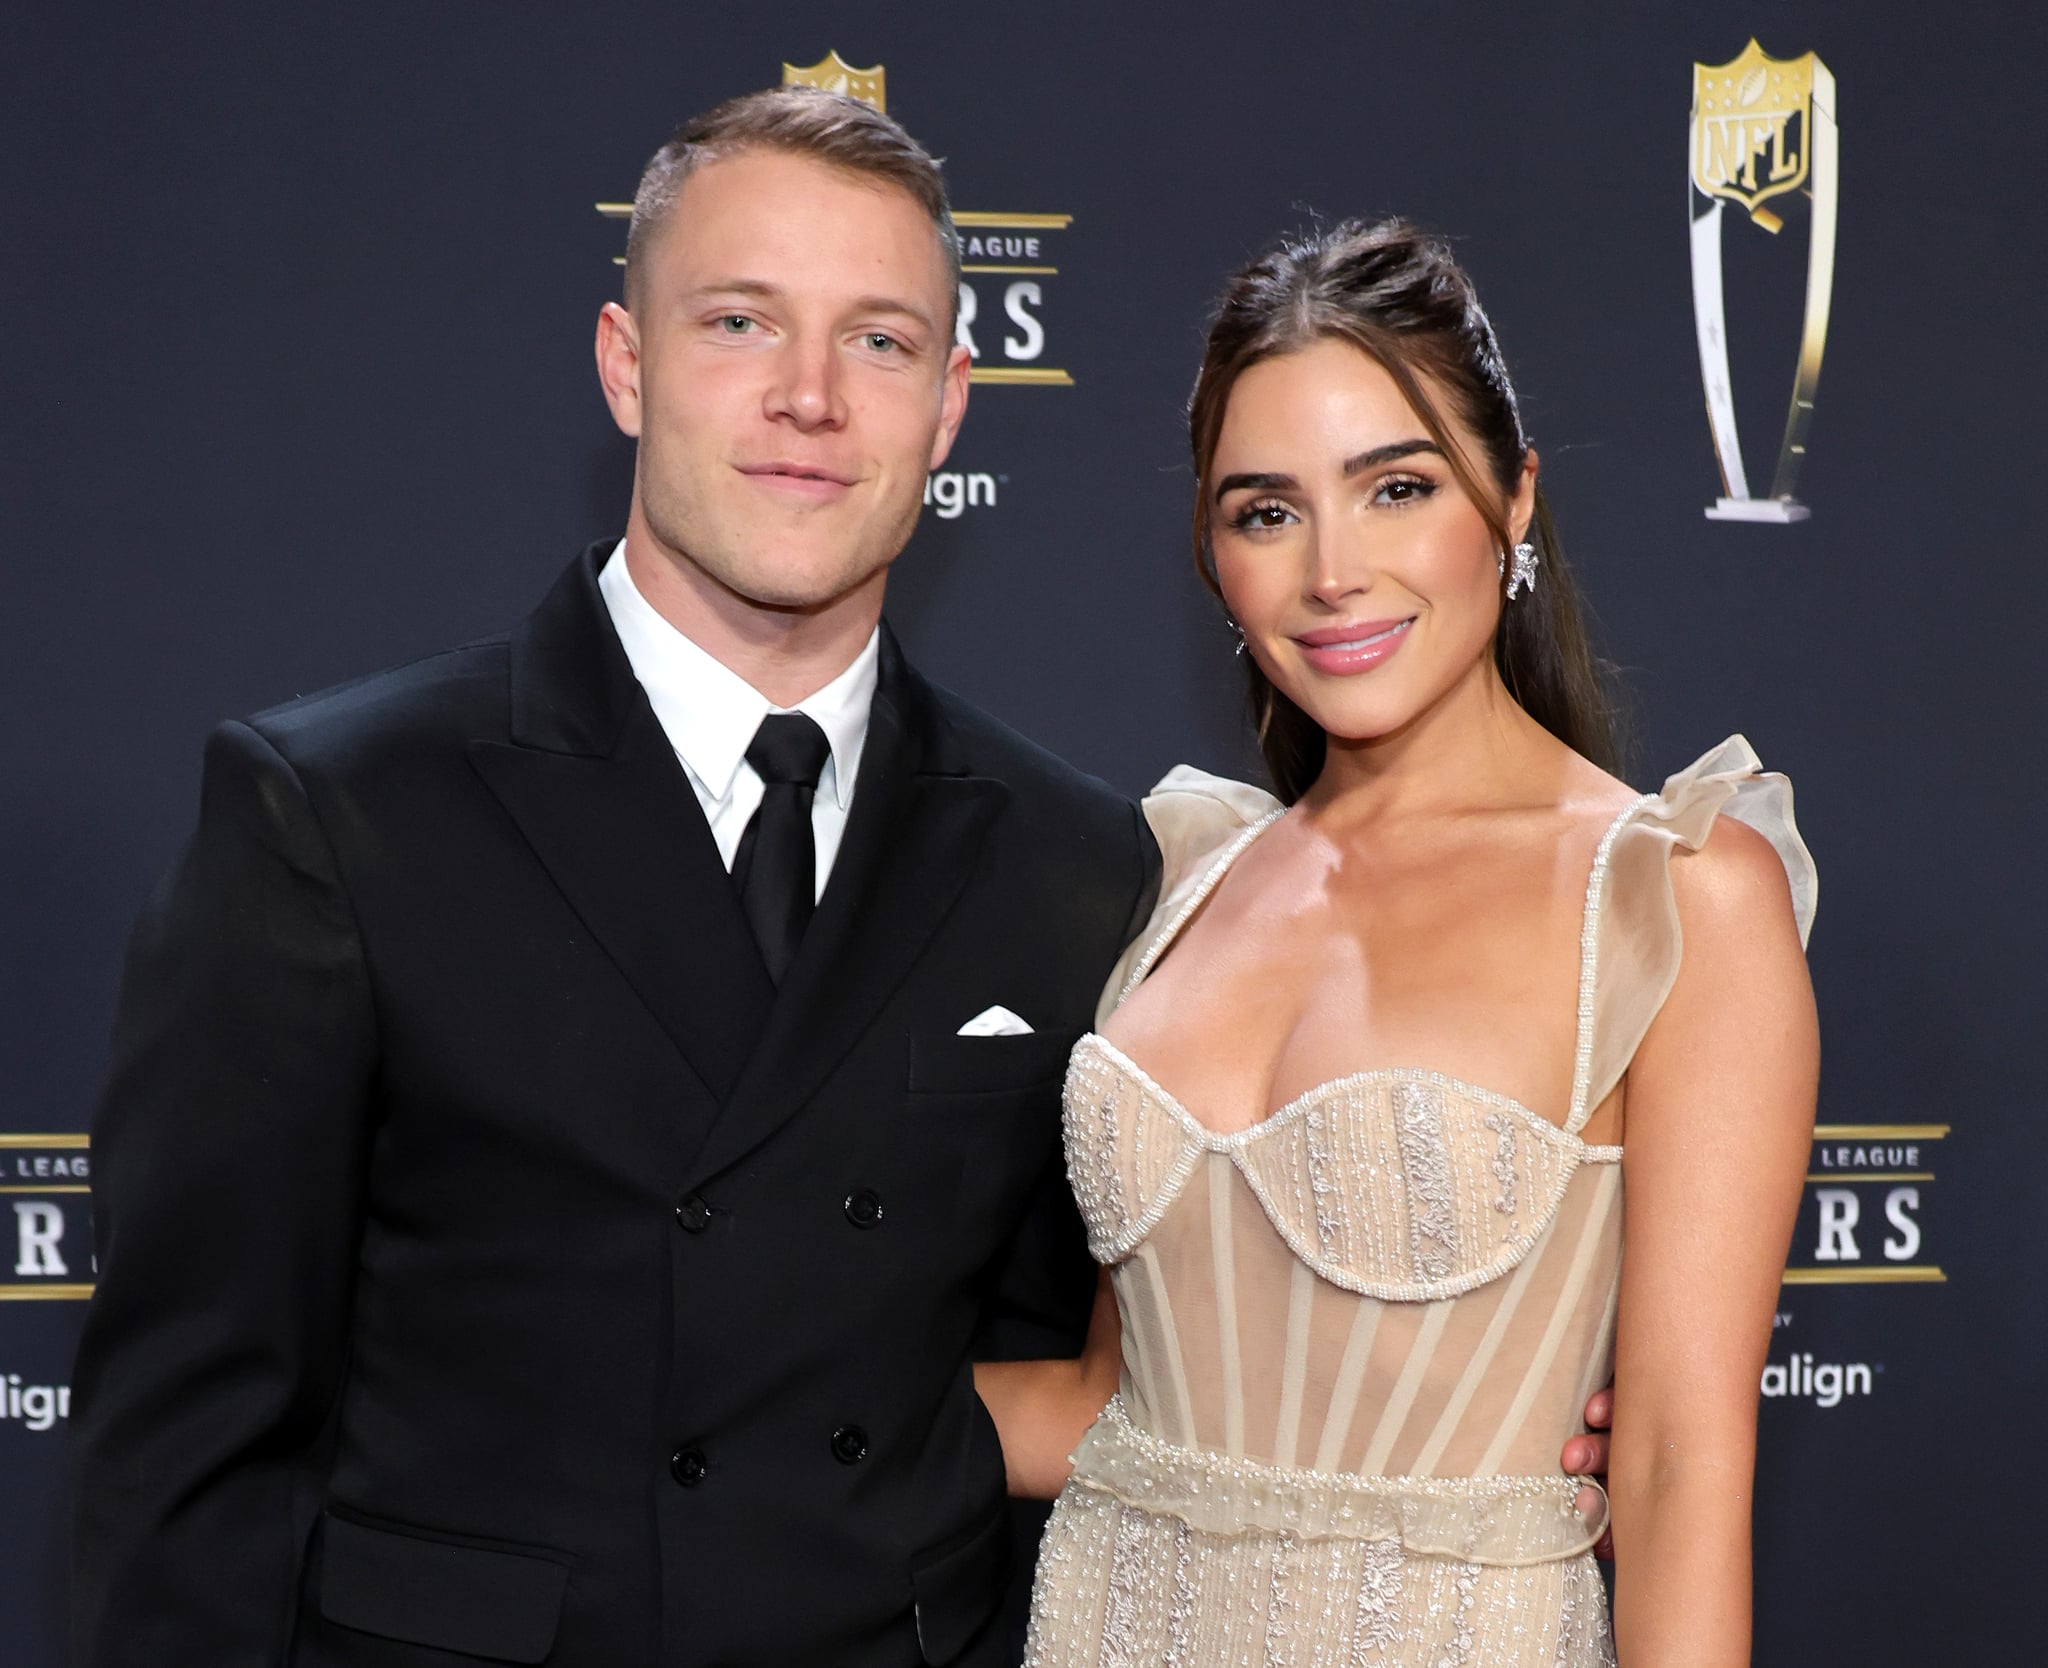 Olivia Culpo Reveals the Wedding Tradition She and Christian McCaffrey Are Skipping